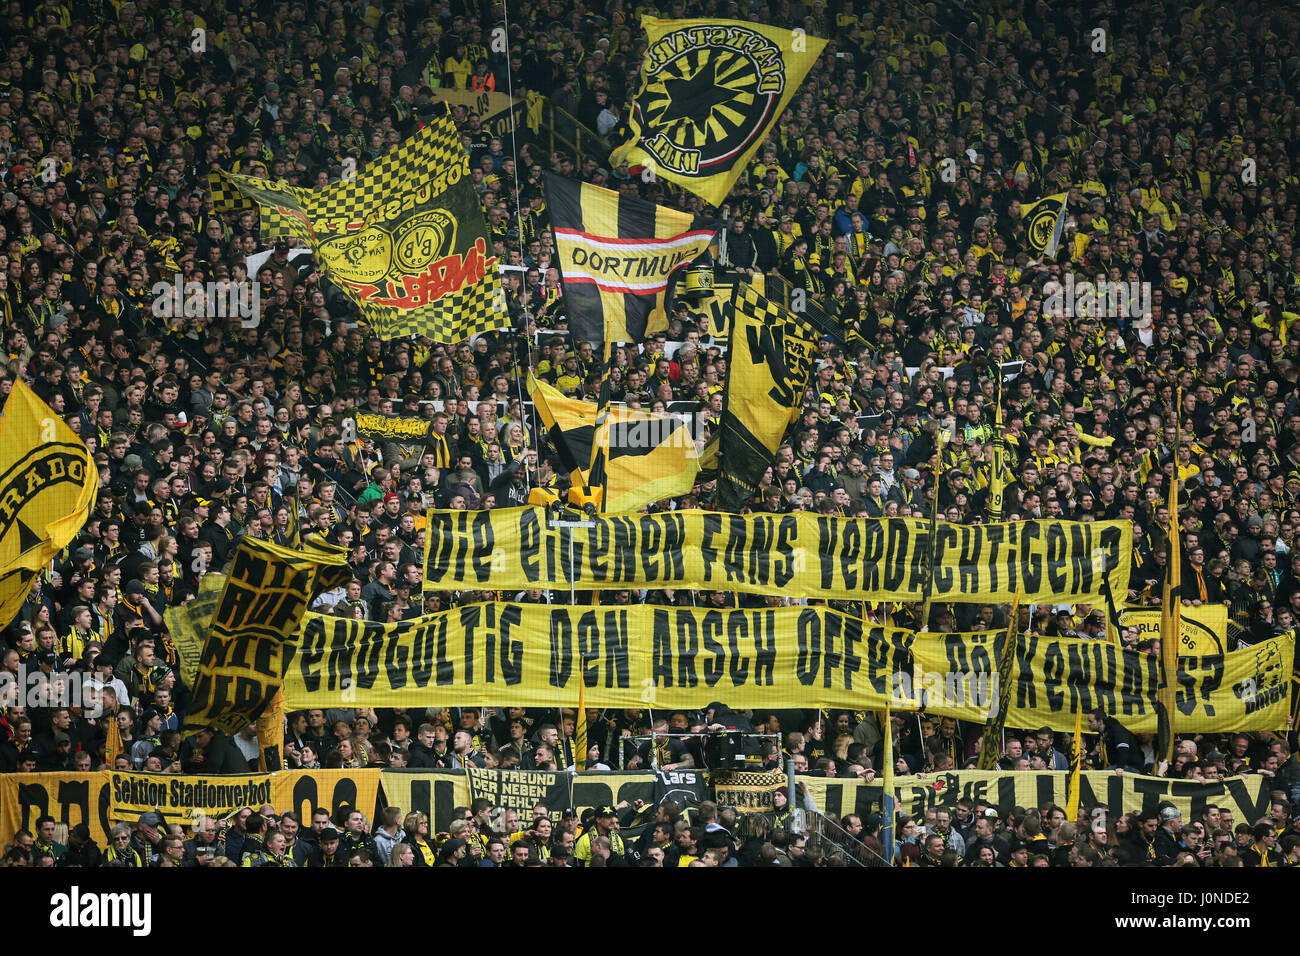 Fans of Dortmund hold up banners reading: 'Die eigenen Fans verdächtigen? Endgültig den Arsch offen, Roeckenhaus?' (lit. 'Suspecting your own fans? Have you gone insane, Roeckenhaus?') during the German Bundesliga soccer match between Borussia Dortmund and Eintracht Frankfurt at the Signal Iduna Park in Dortmund, Germany, 15 April 2017. (EMBARGO CONDITIONS - ATTENTION: Due to the accreditation guidelines, the DFL only permits the publication and utilisation of up to 15 pictures per match on the internet and in online media during the match.) Photo: Ina Fassbender/dpa Stock Photo